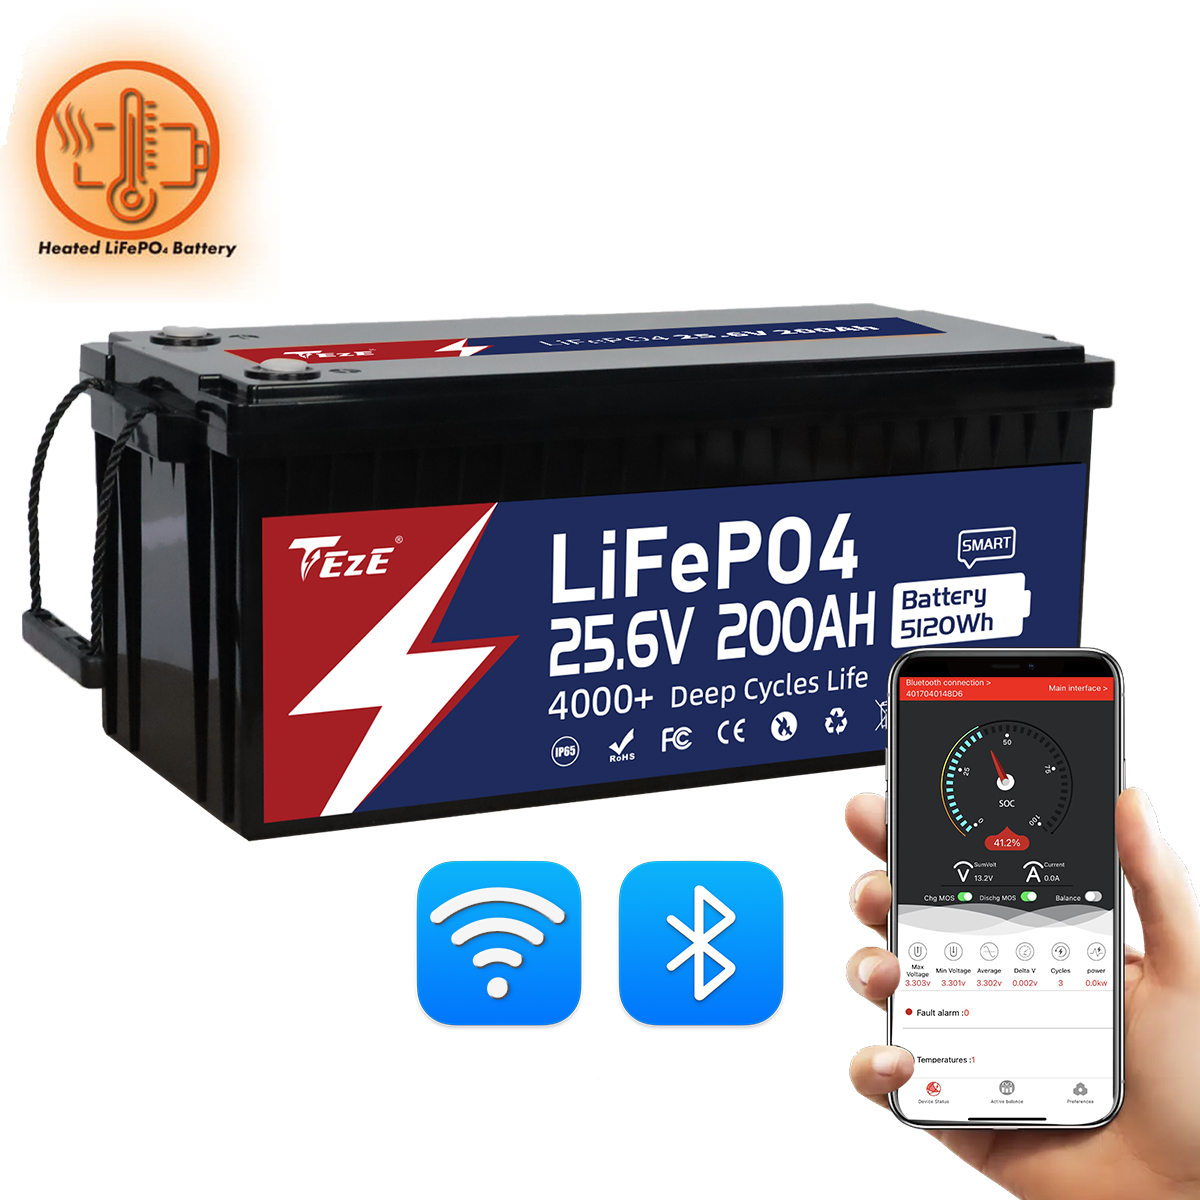 New Add WiFi-TezePower 24V 200Ah LiFePO4 Battery with WiFi and Bluetooth, Self-heating and Active Balancer, Built-in 200A Daly BMS(WiFi Built-in Version)-TezePower